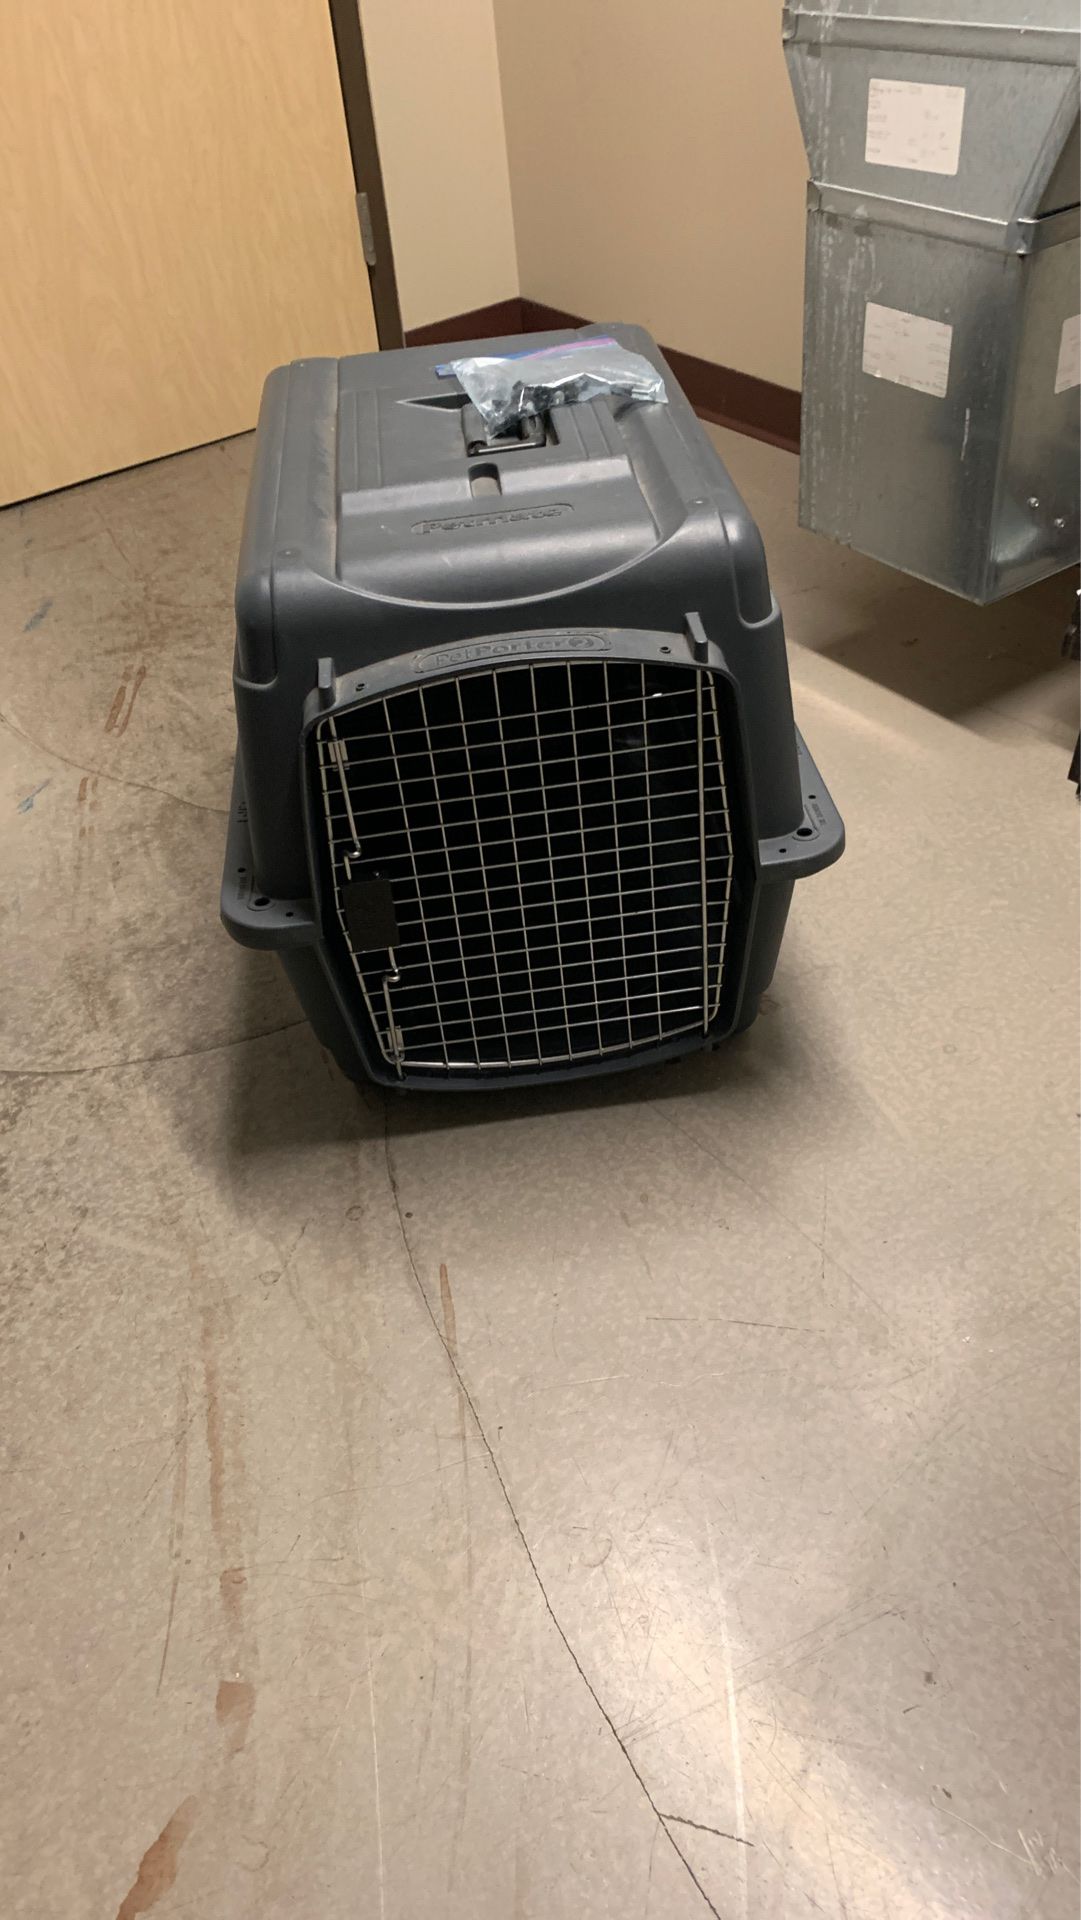 Dog crate for sale